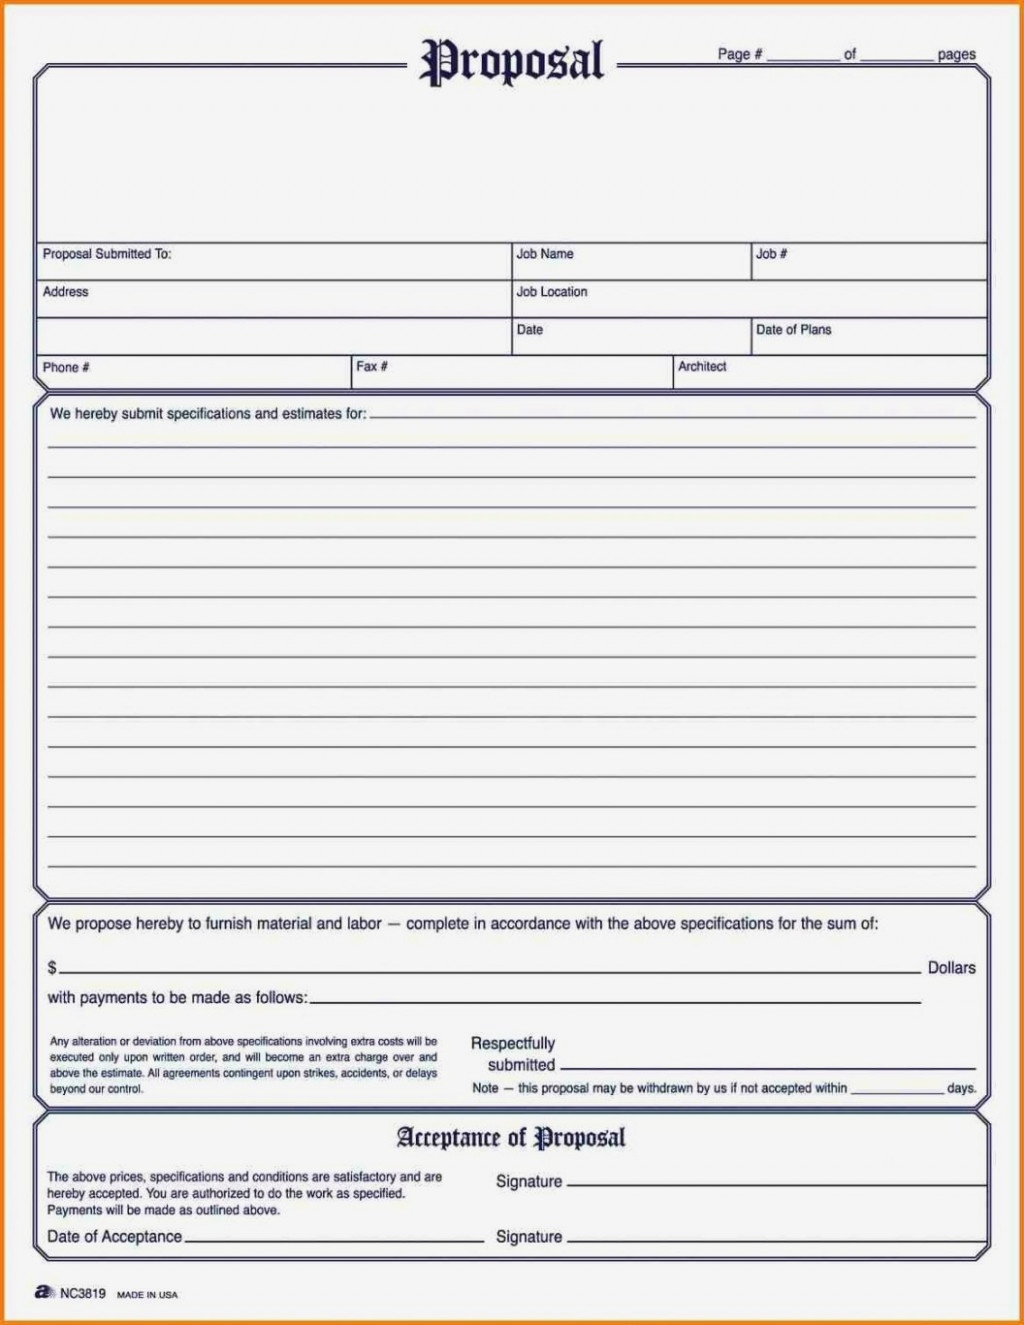 Printable Contractor Bid Forms Proposal Student Project Construction - Free Printable Contractor Bid Forms